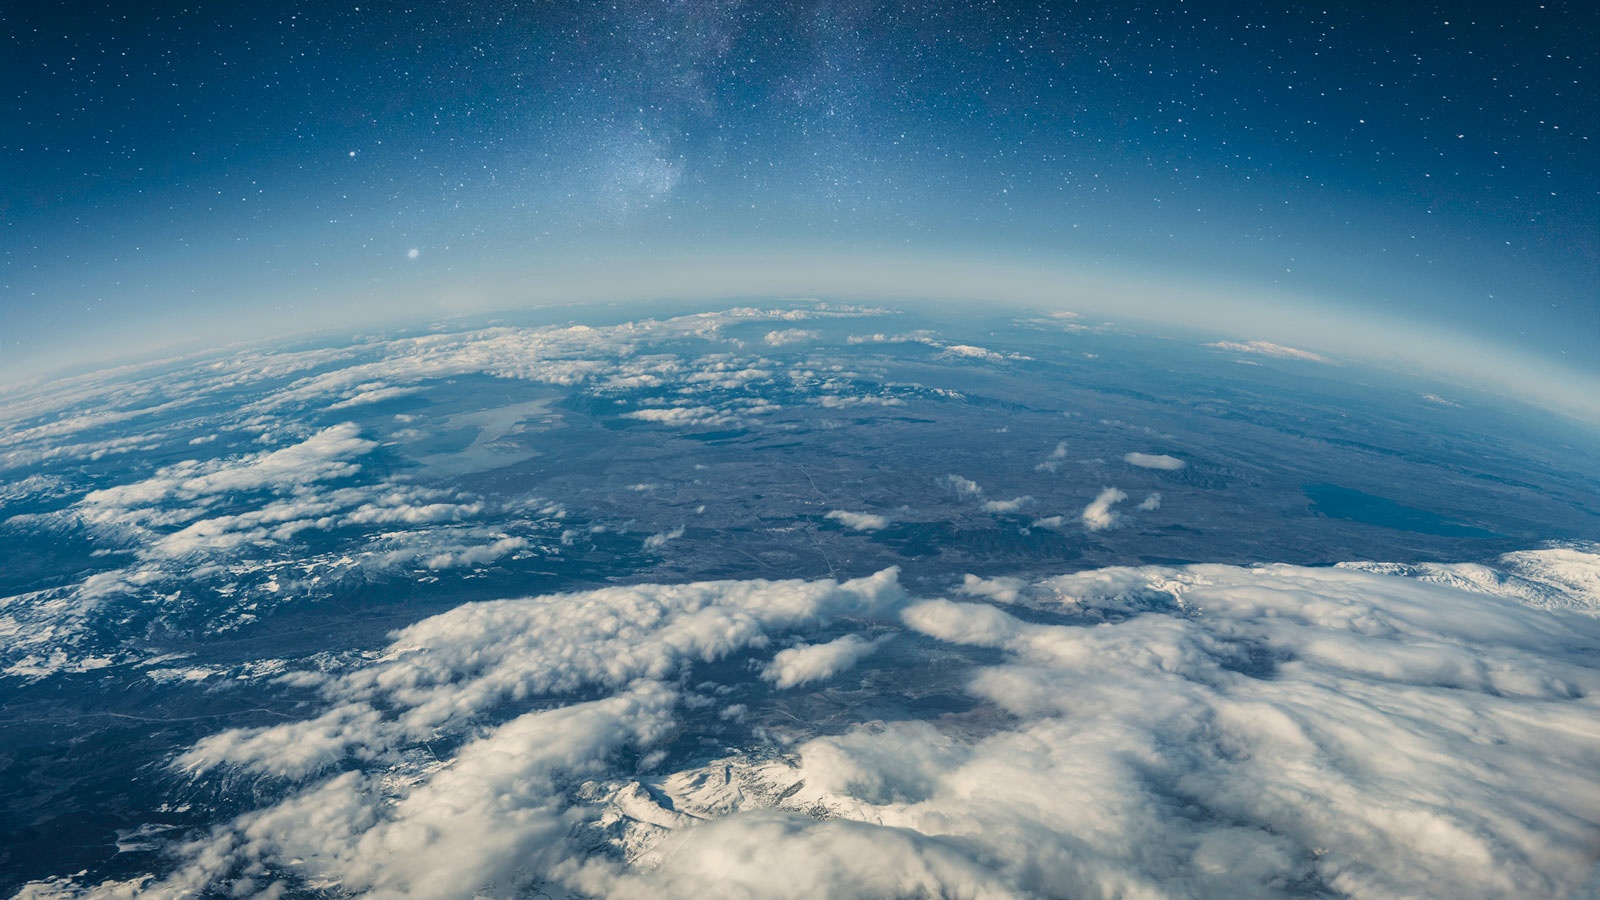 Removing excess water vapour from the stratosphere could help cool our planet